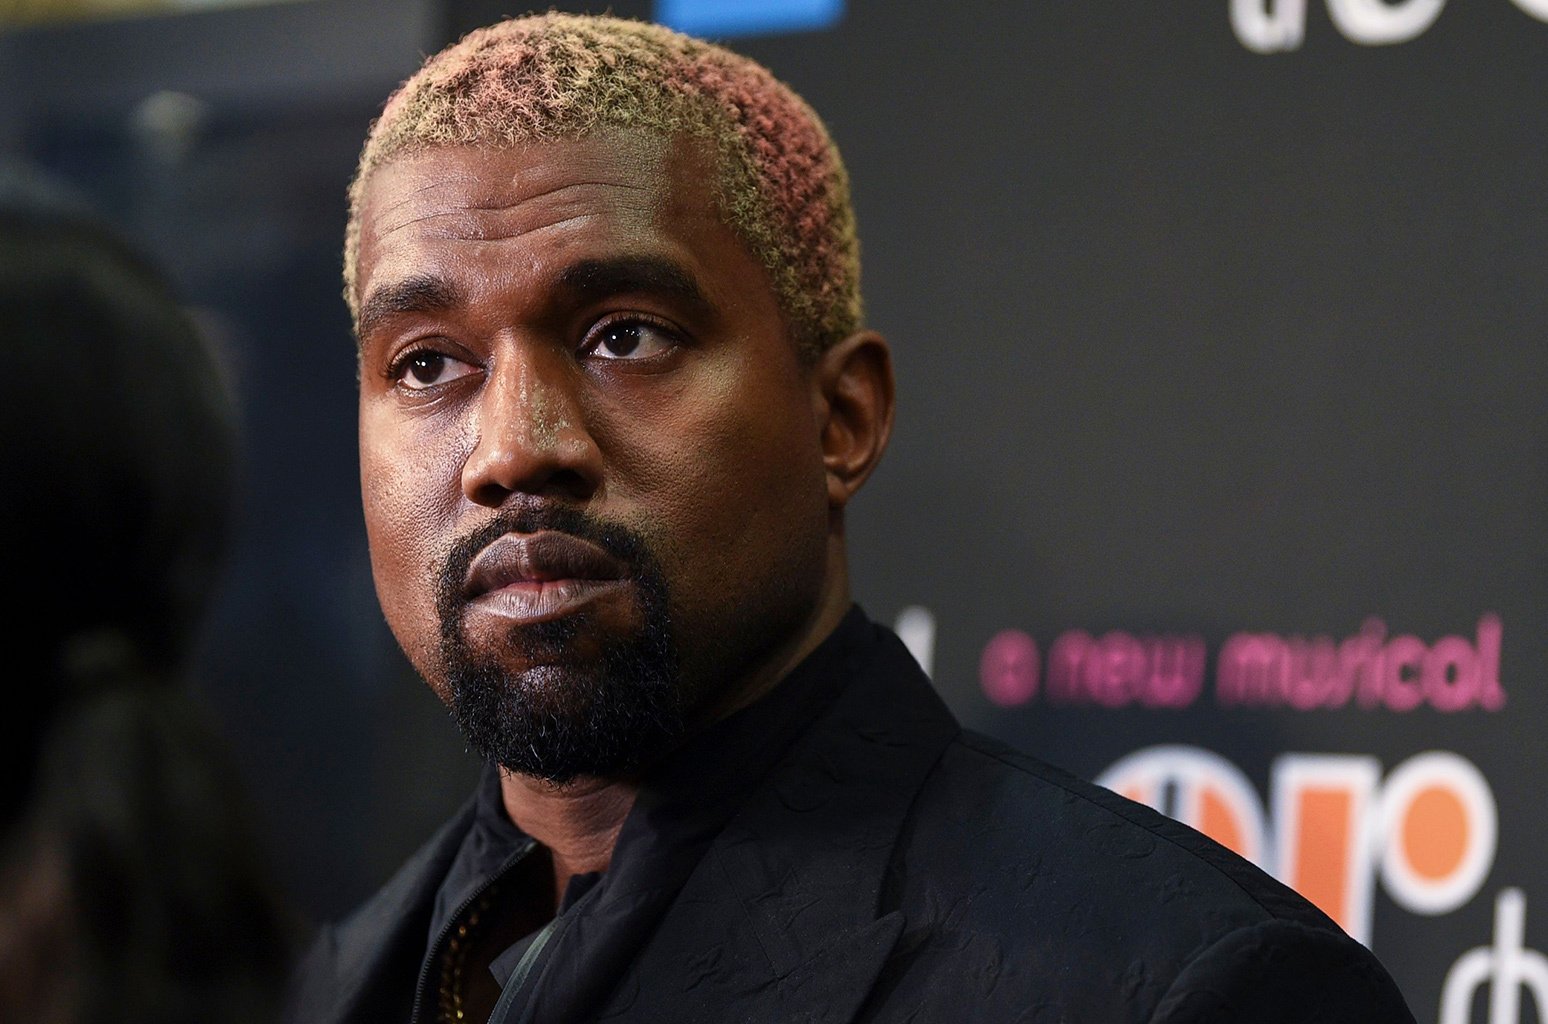 49-facts-about-kanye-west